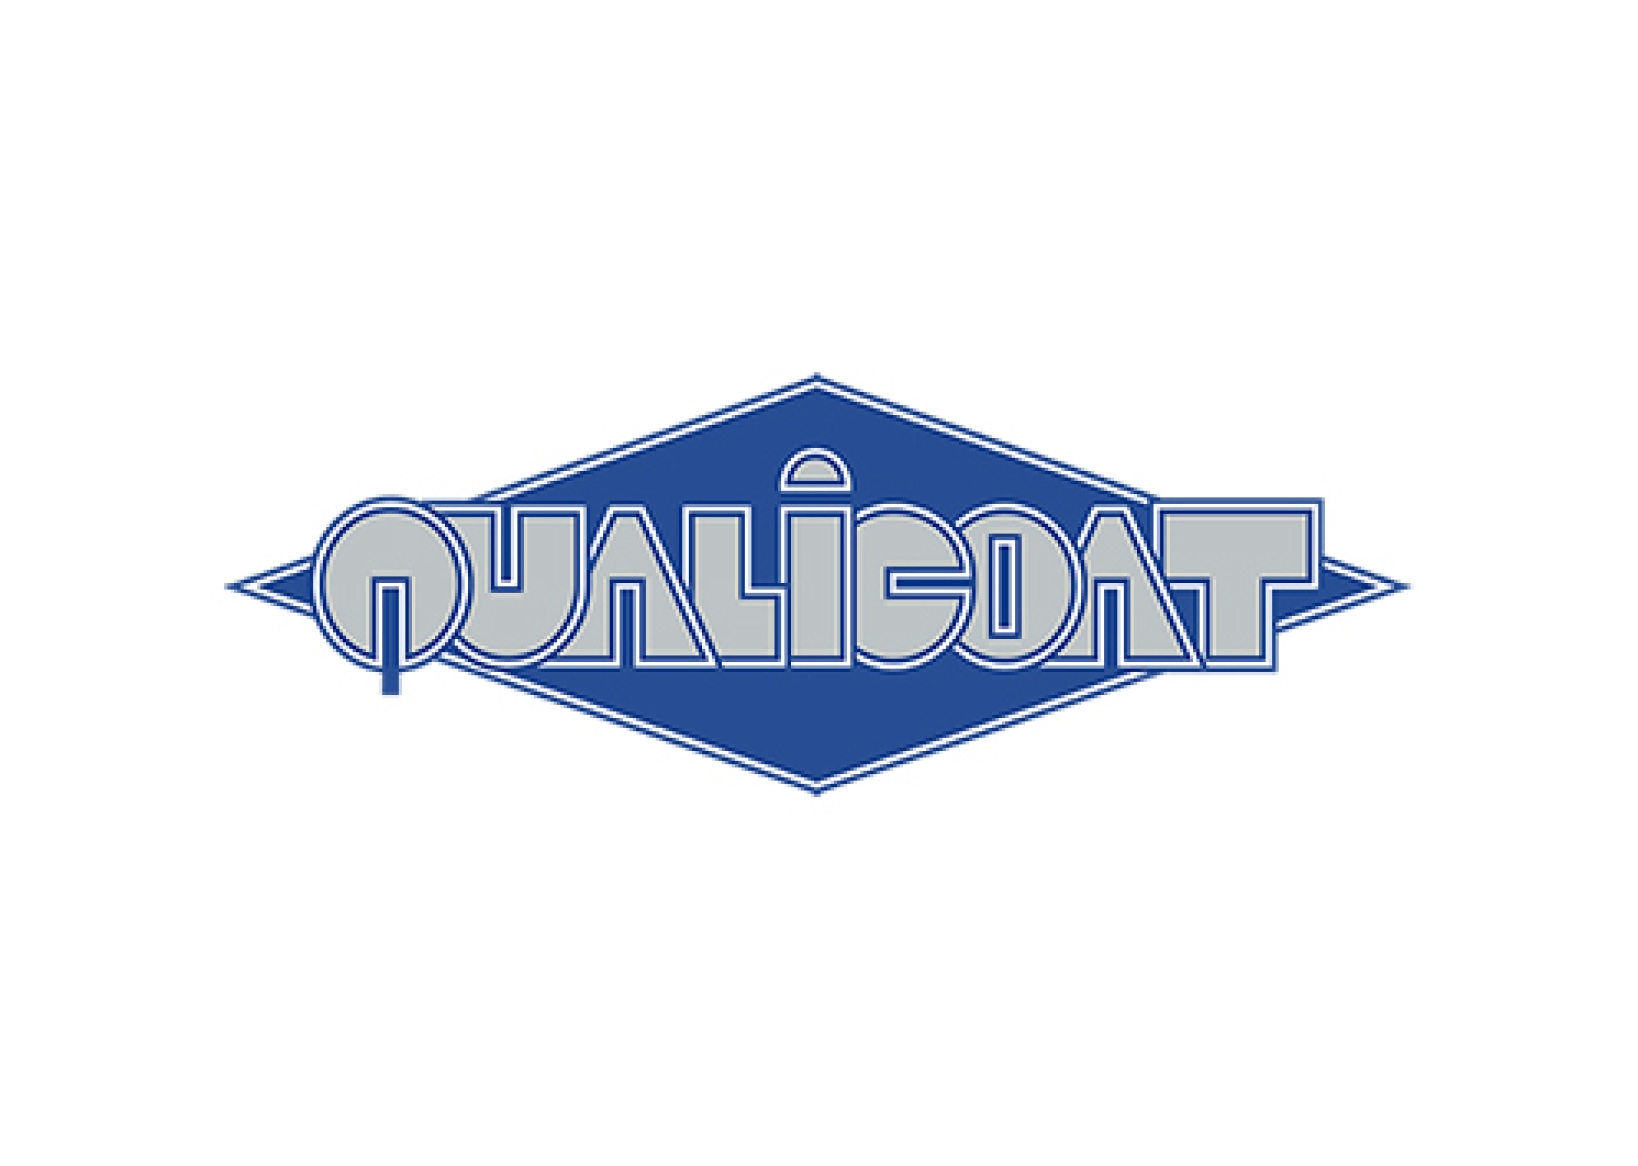 Qualicoat Approved